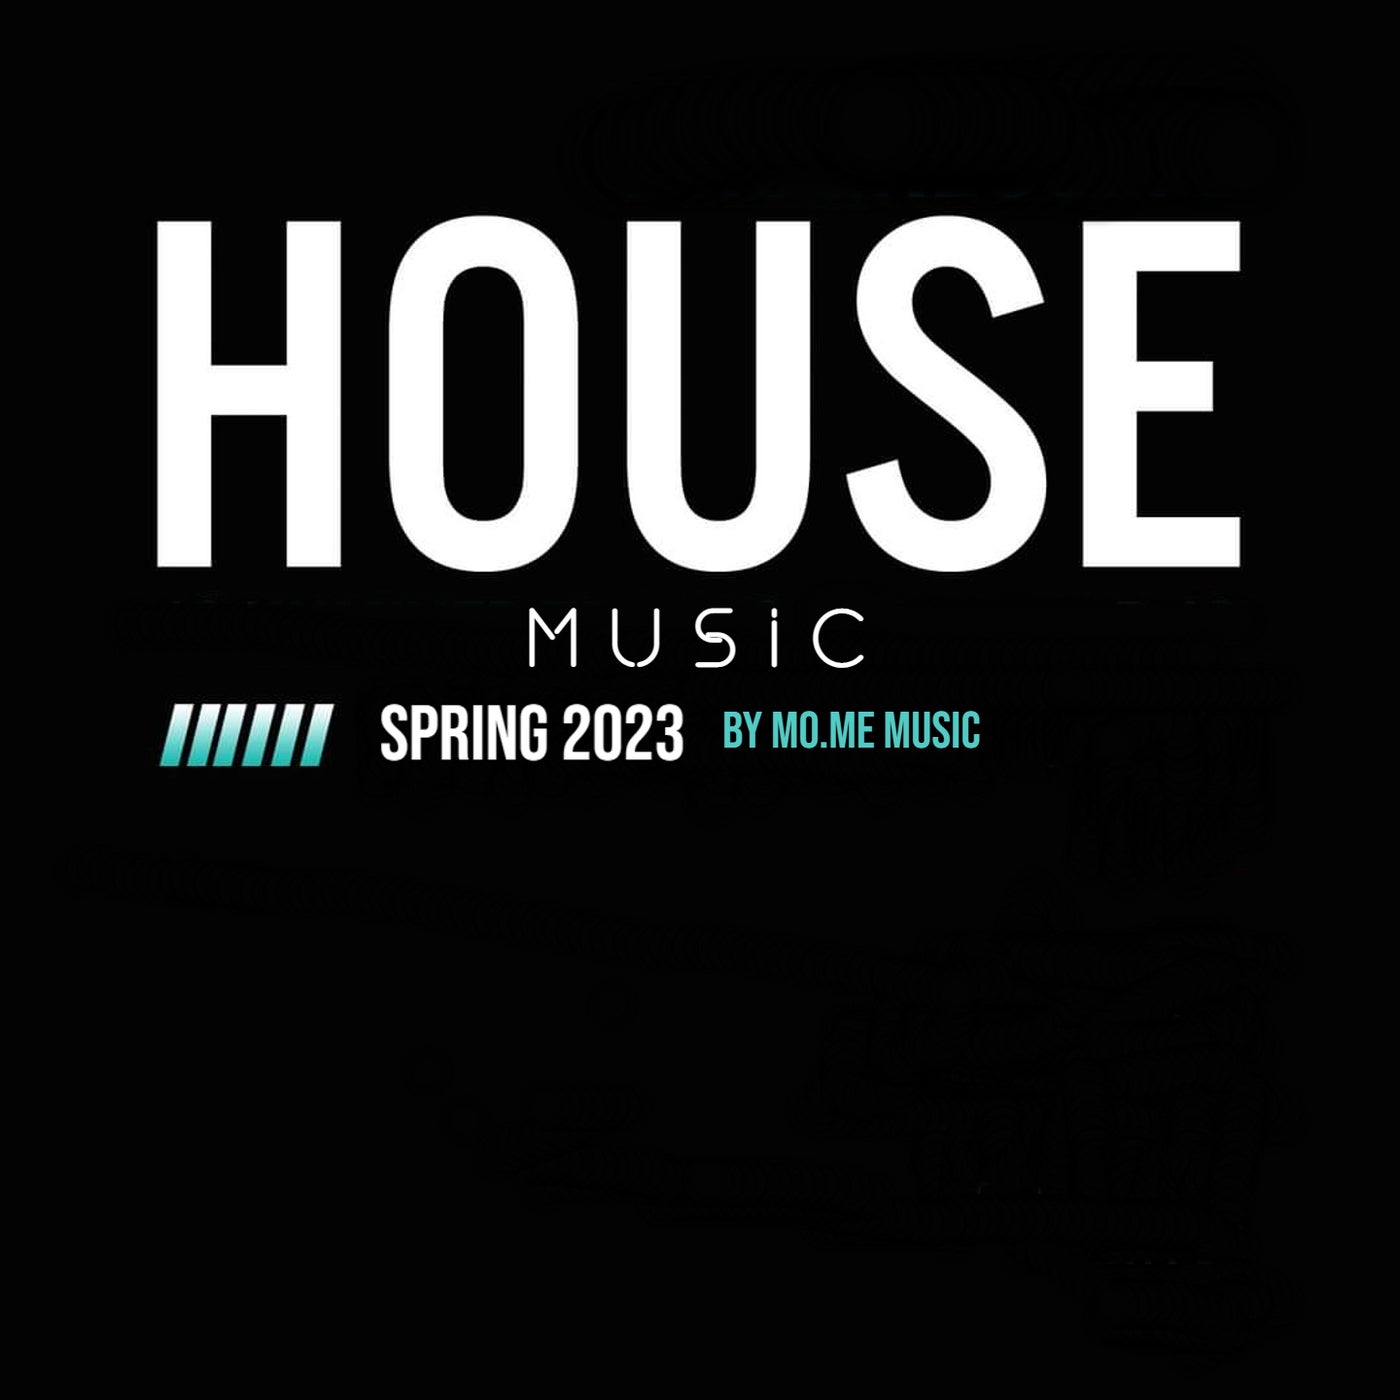 HOUSE MUSIC Spring 2023  BY MO.ME MUSIC